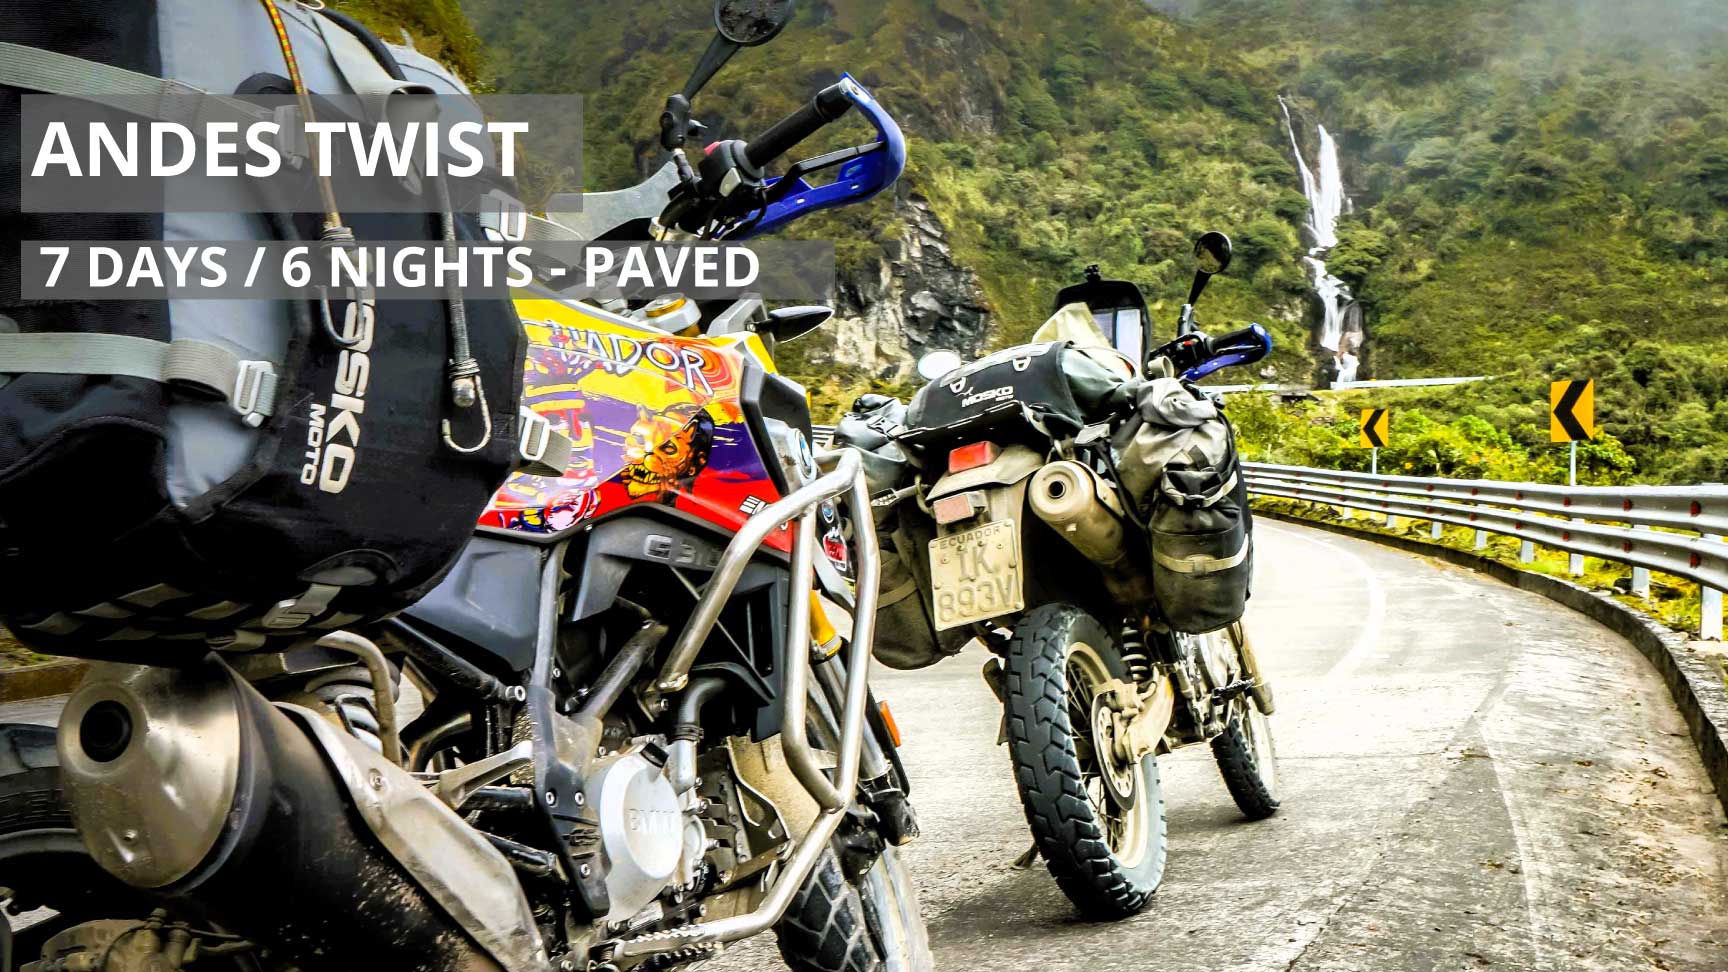 Self-Guided Andes Twist Motorcycle Tour